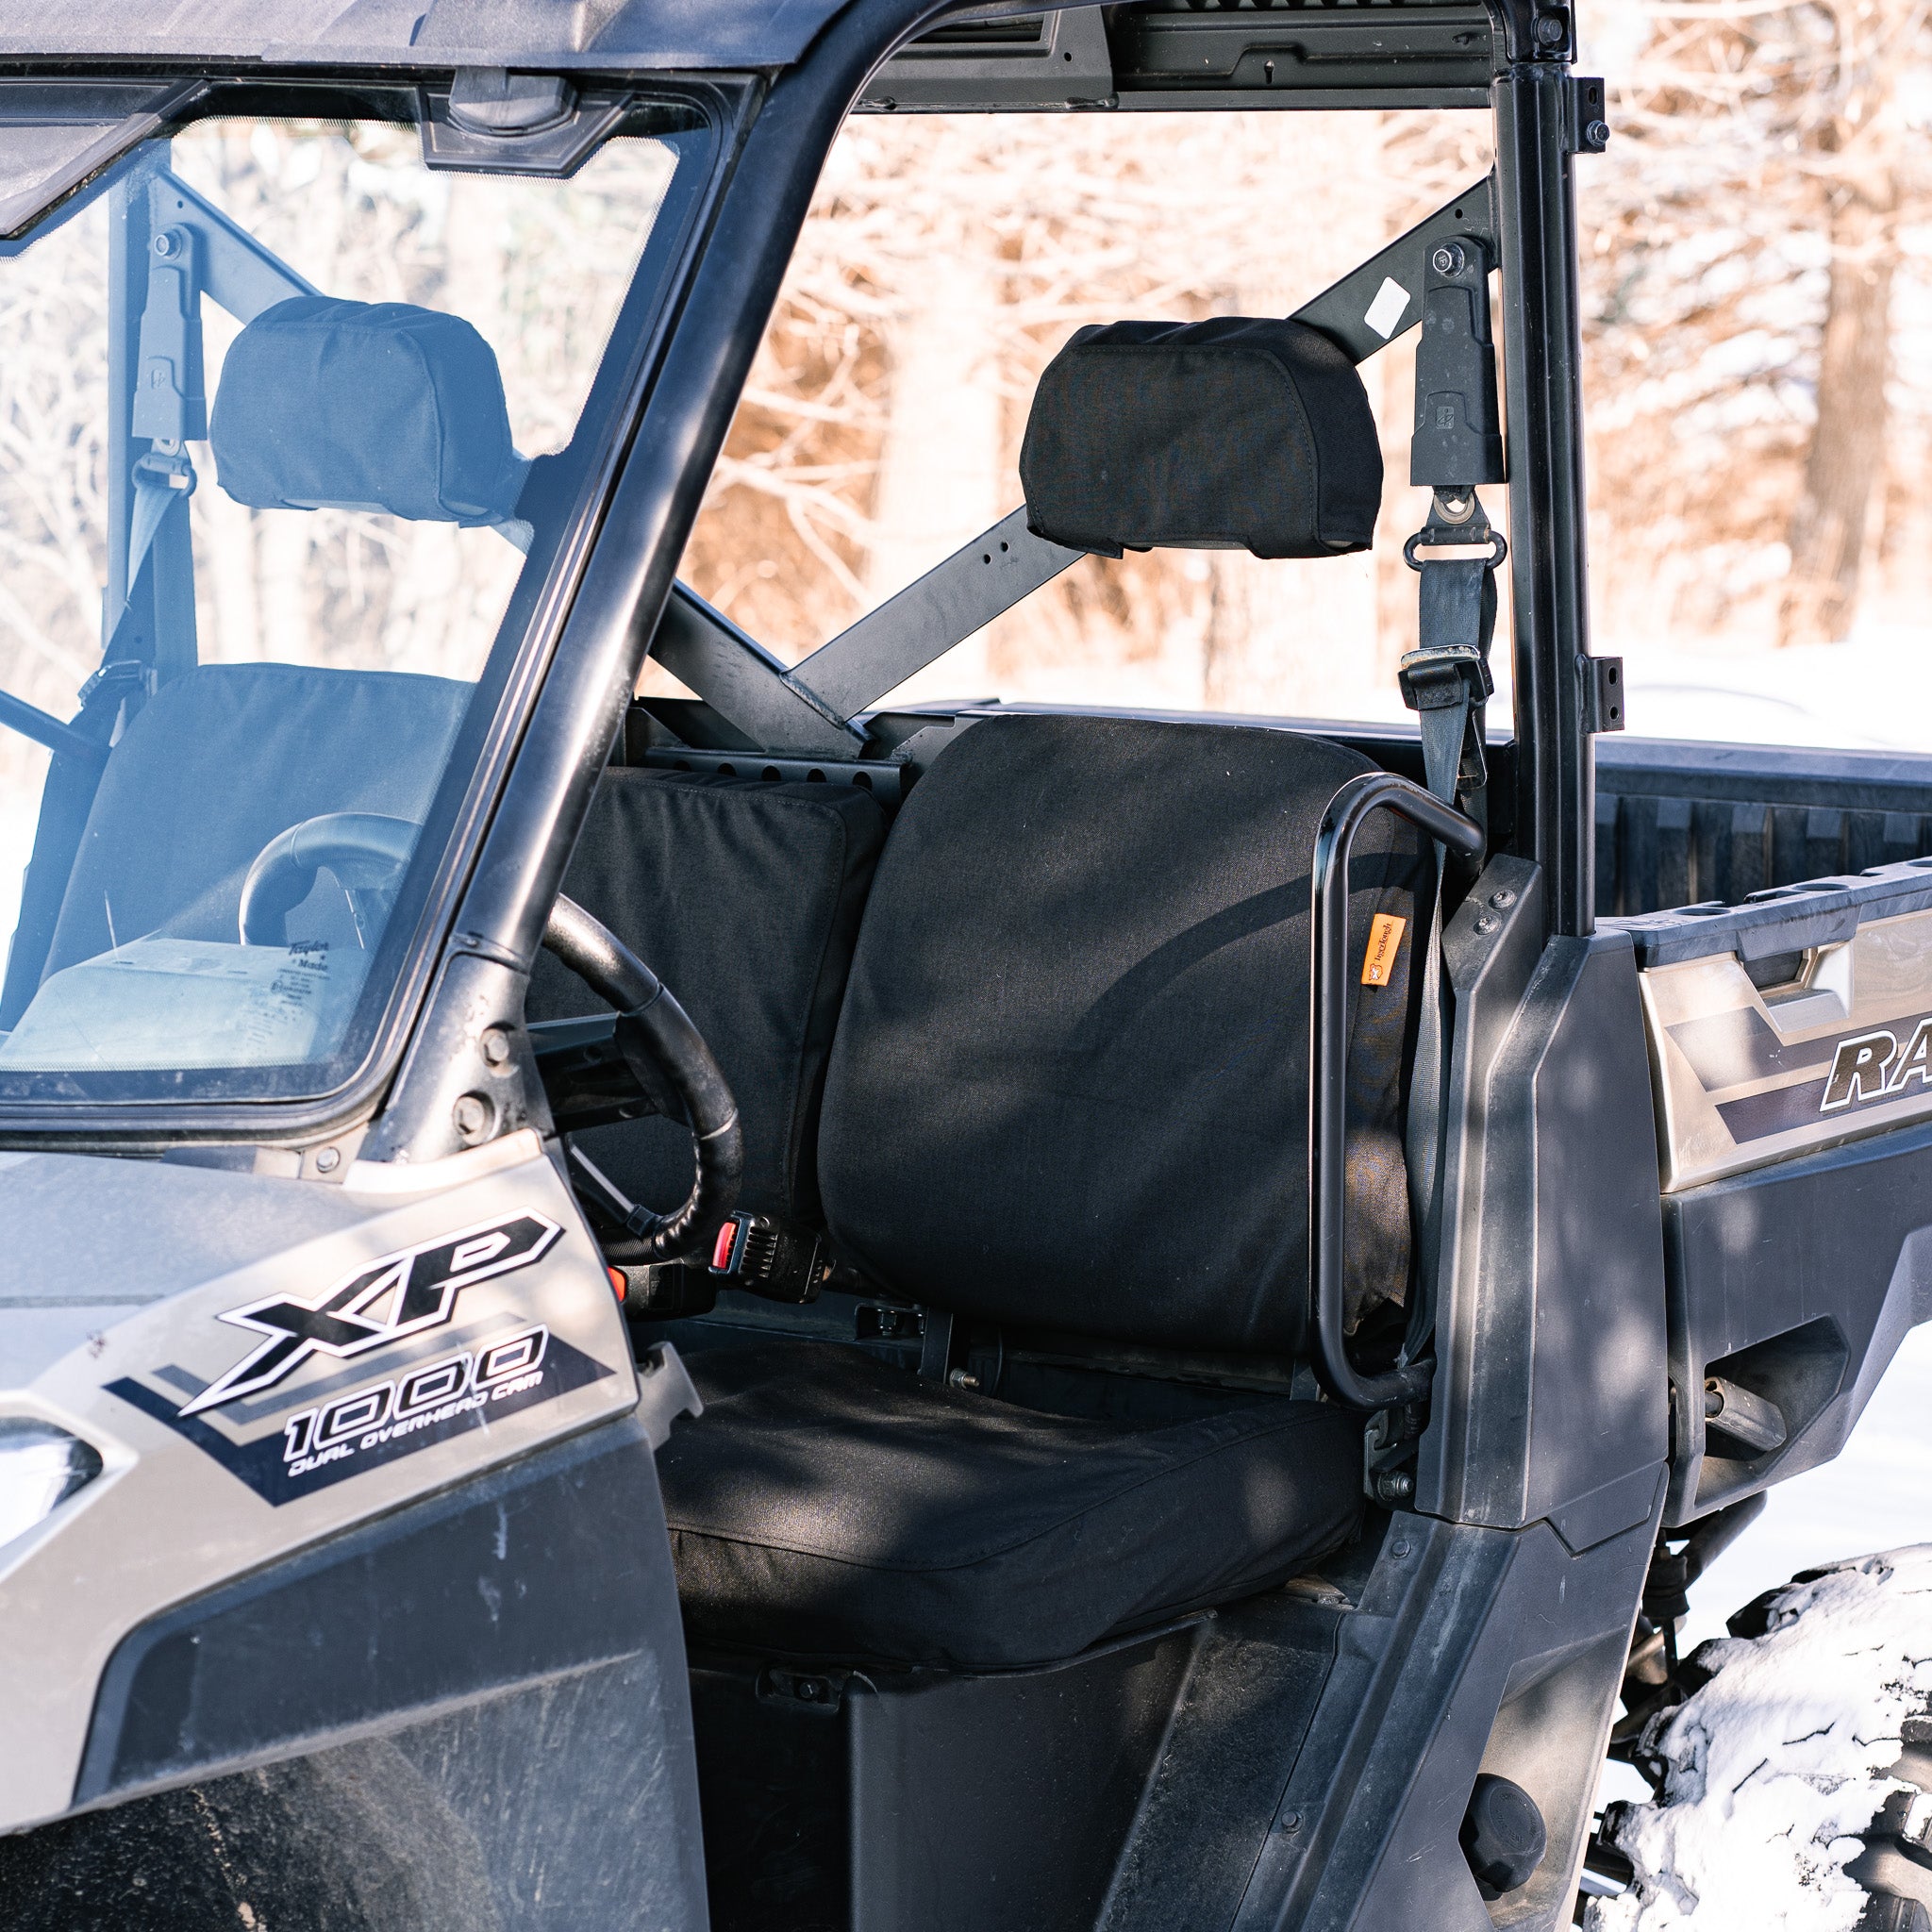 TigerTough Seat Covers in a Polaris Ranger side-by-side. TigerTough has seat covers for common side-by-sides, ATVs, and UTVs to protect their seats from the elements and the wear and tear of hard use.